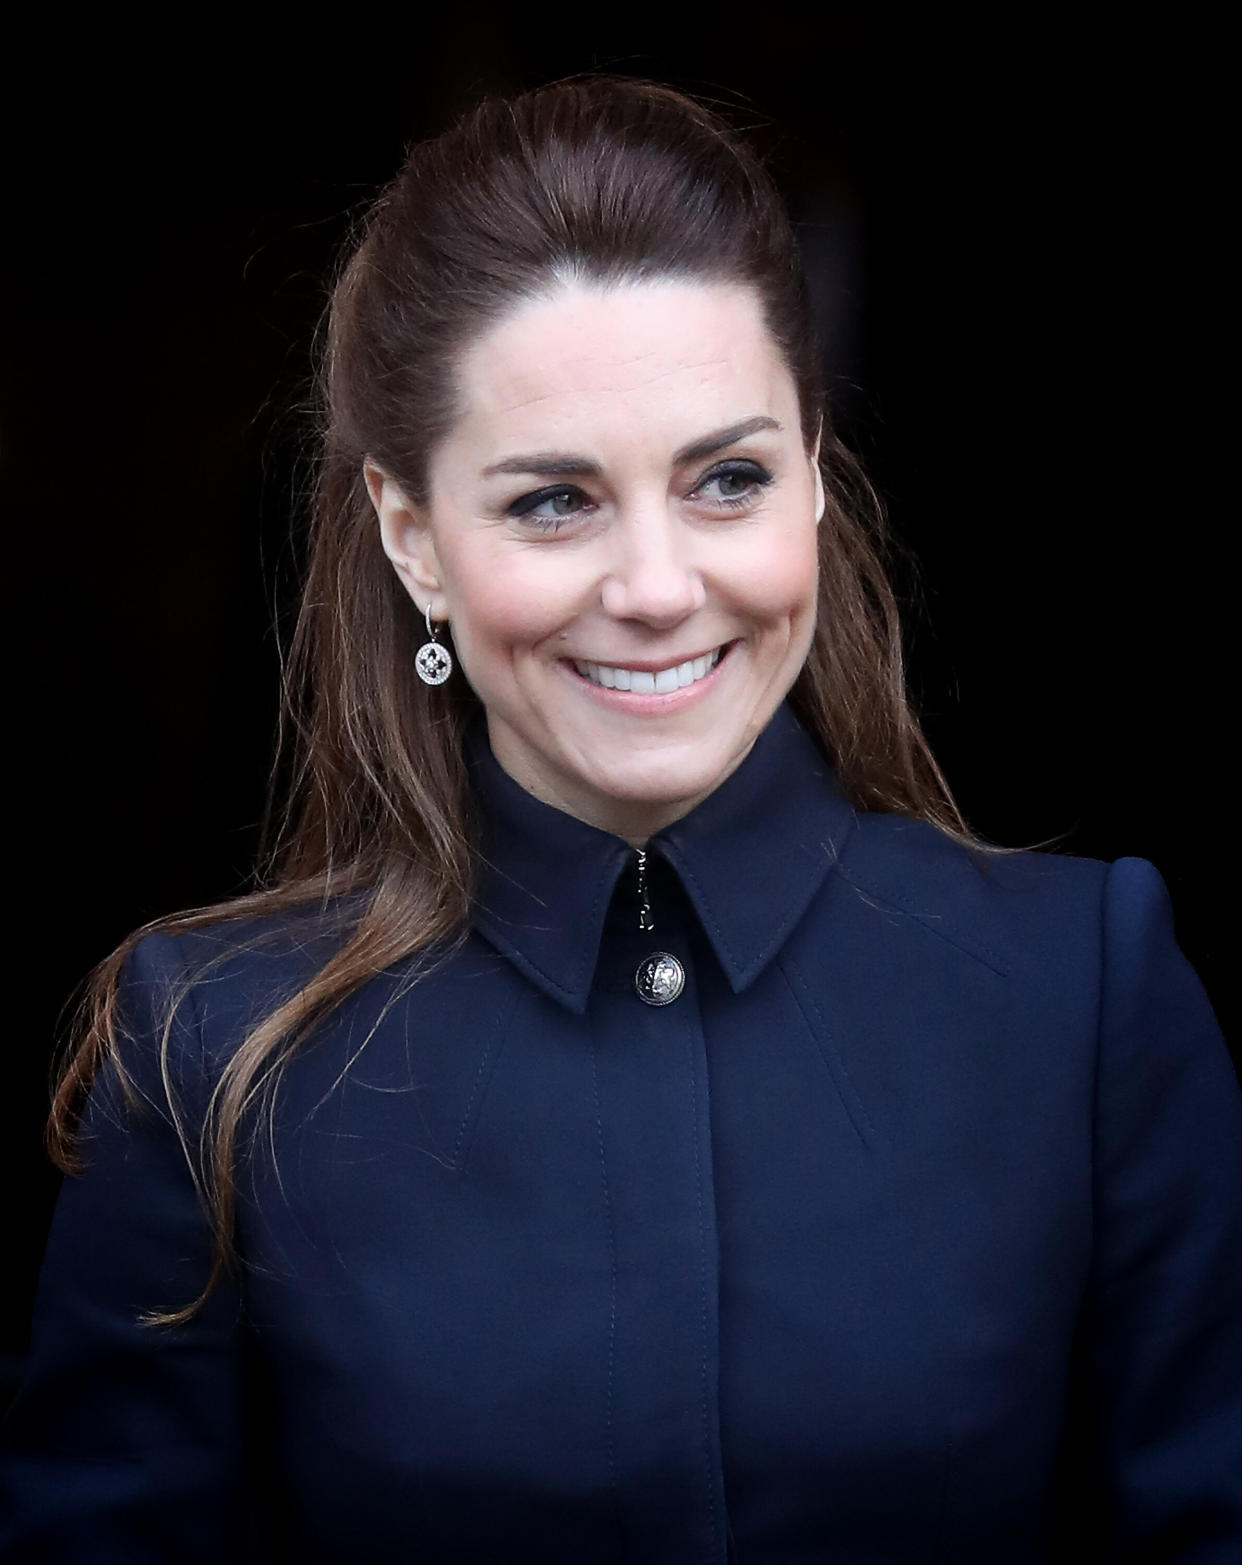 LOUGHBOROUGH,  - FEBRUARY 11: Catherine, Duchess of Cambridge visits the Defence Medical Rehabilitation Centre, Stanford Hall on February 11, 2020 in Loughborough, United Kingdom. Known as ‘DMRC Stanford Hall’, the centre is operated by the MOD and began admitting patients in October 2018. They deliver in-patient and residential rehabilitation to serving members of the Armed Forces. (Photo by Chris Jackson/Getty Images) (Photo: Chris Jackson via Getty Images)